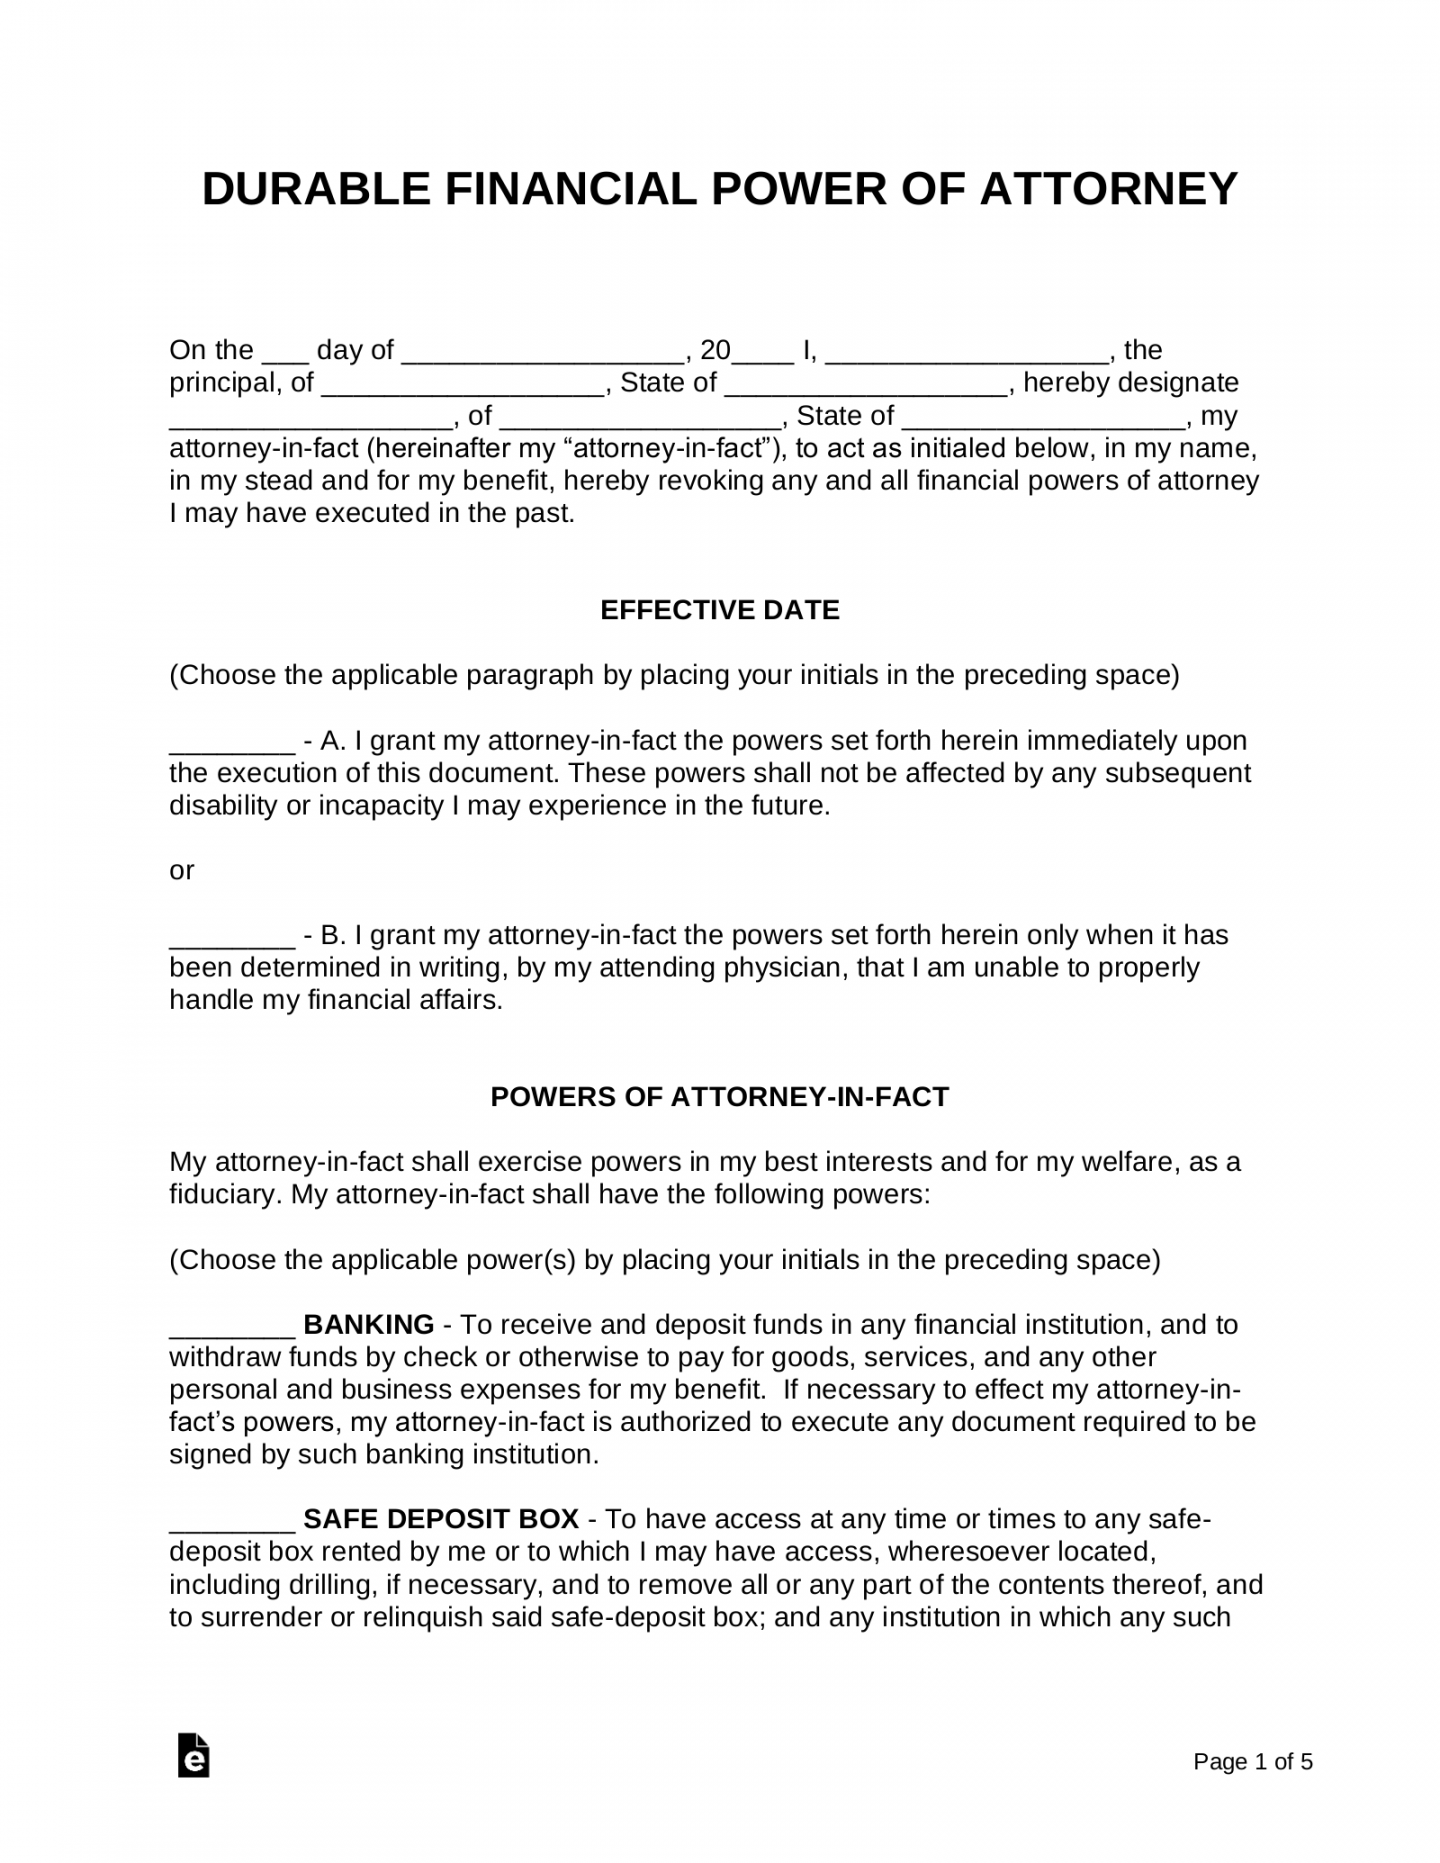 Free Durable (Financial) Power of Attorney Form - PDF  Word – eForms - FREE Printables - Free Printable Durable Power Of Attorney